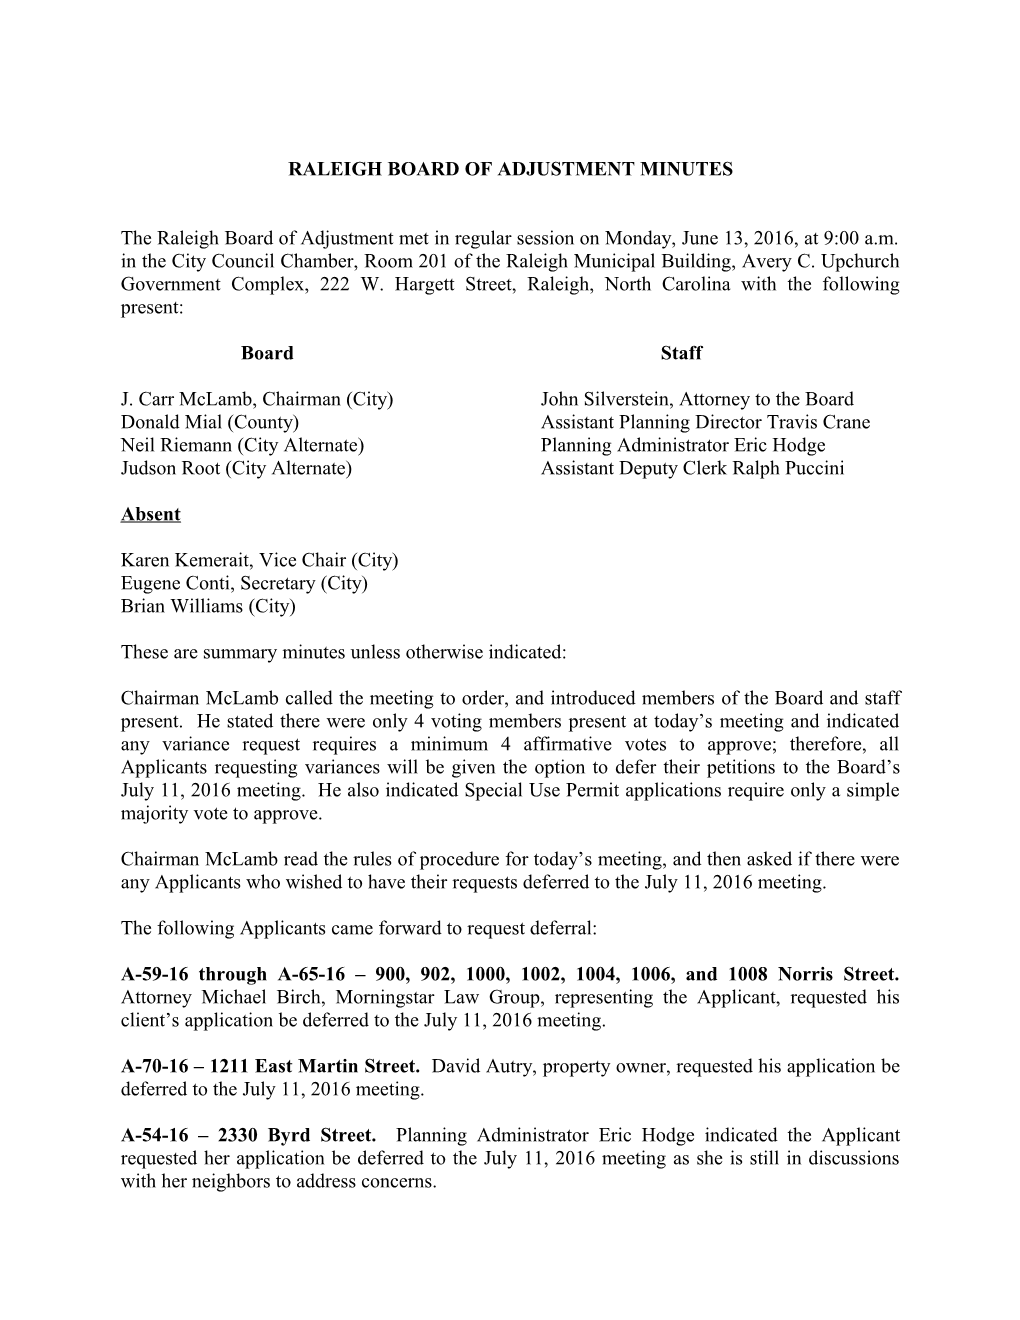 Raleigh Board of Adjustment Minutes - 06/13/2016